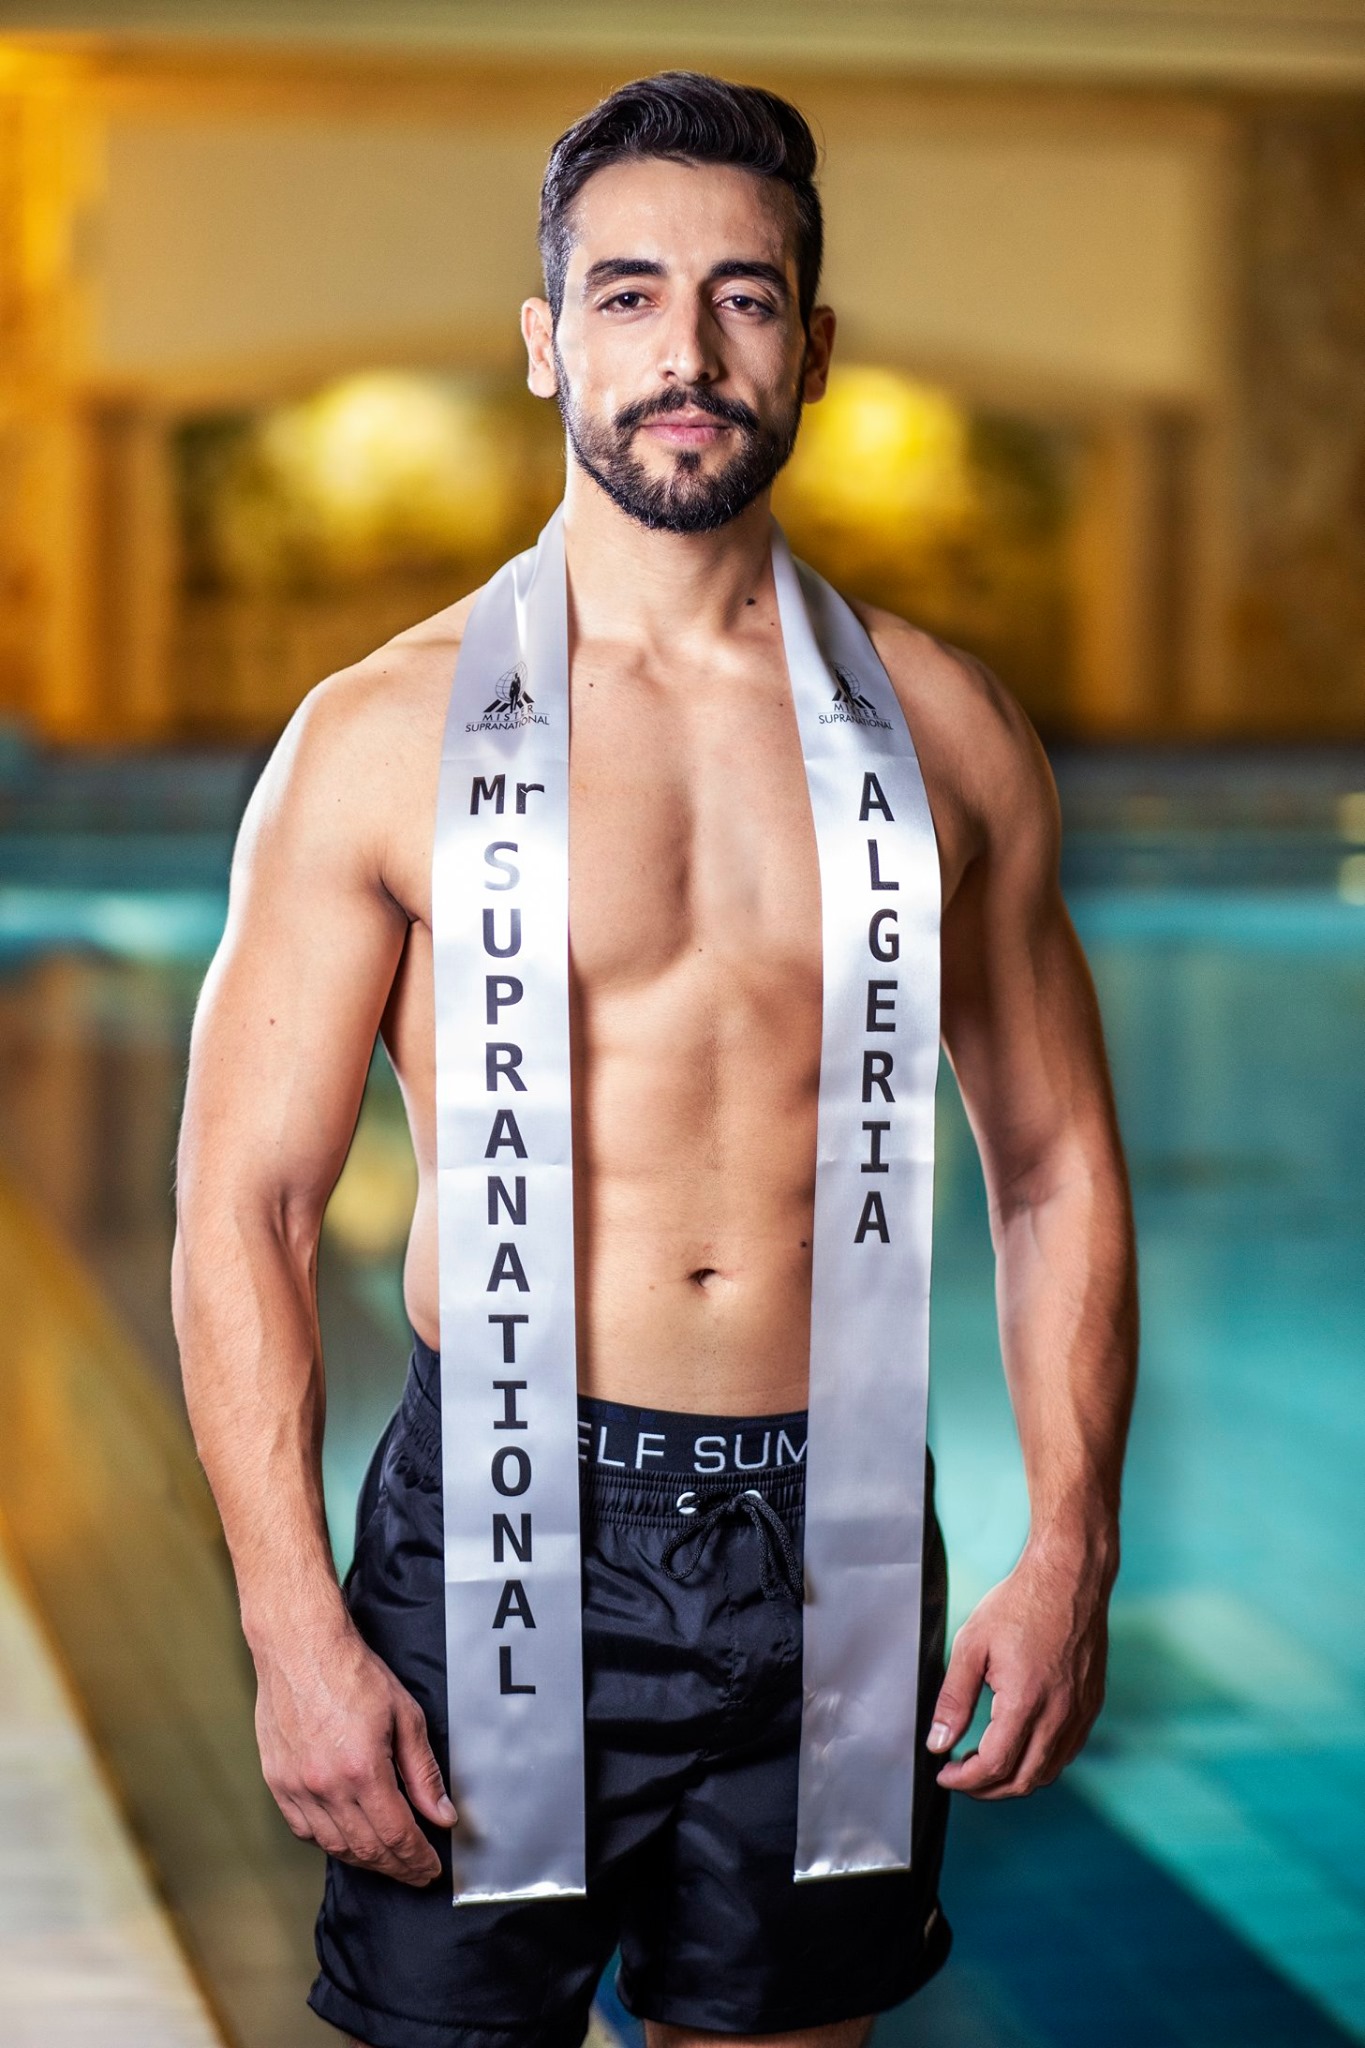 Mister Supranational 2019 Official Swimwear 113